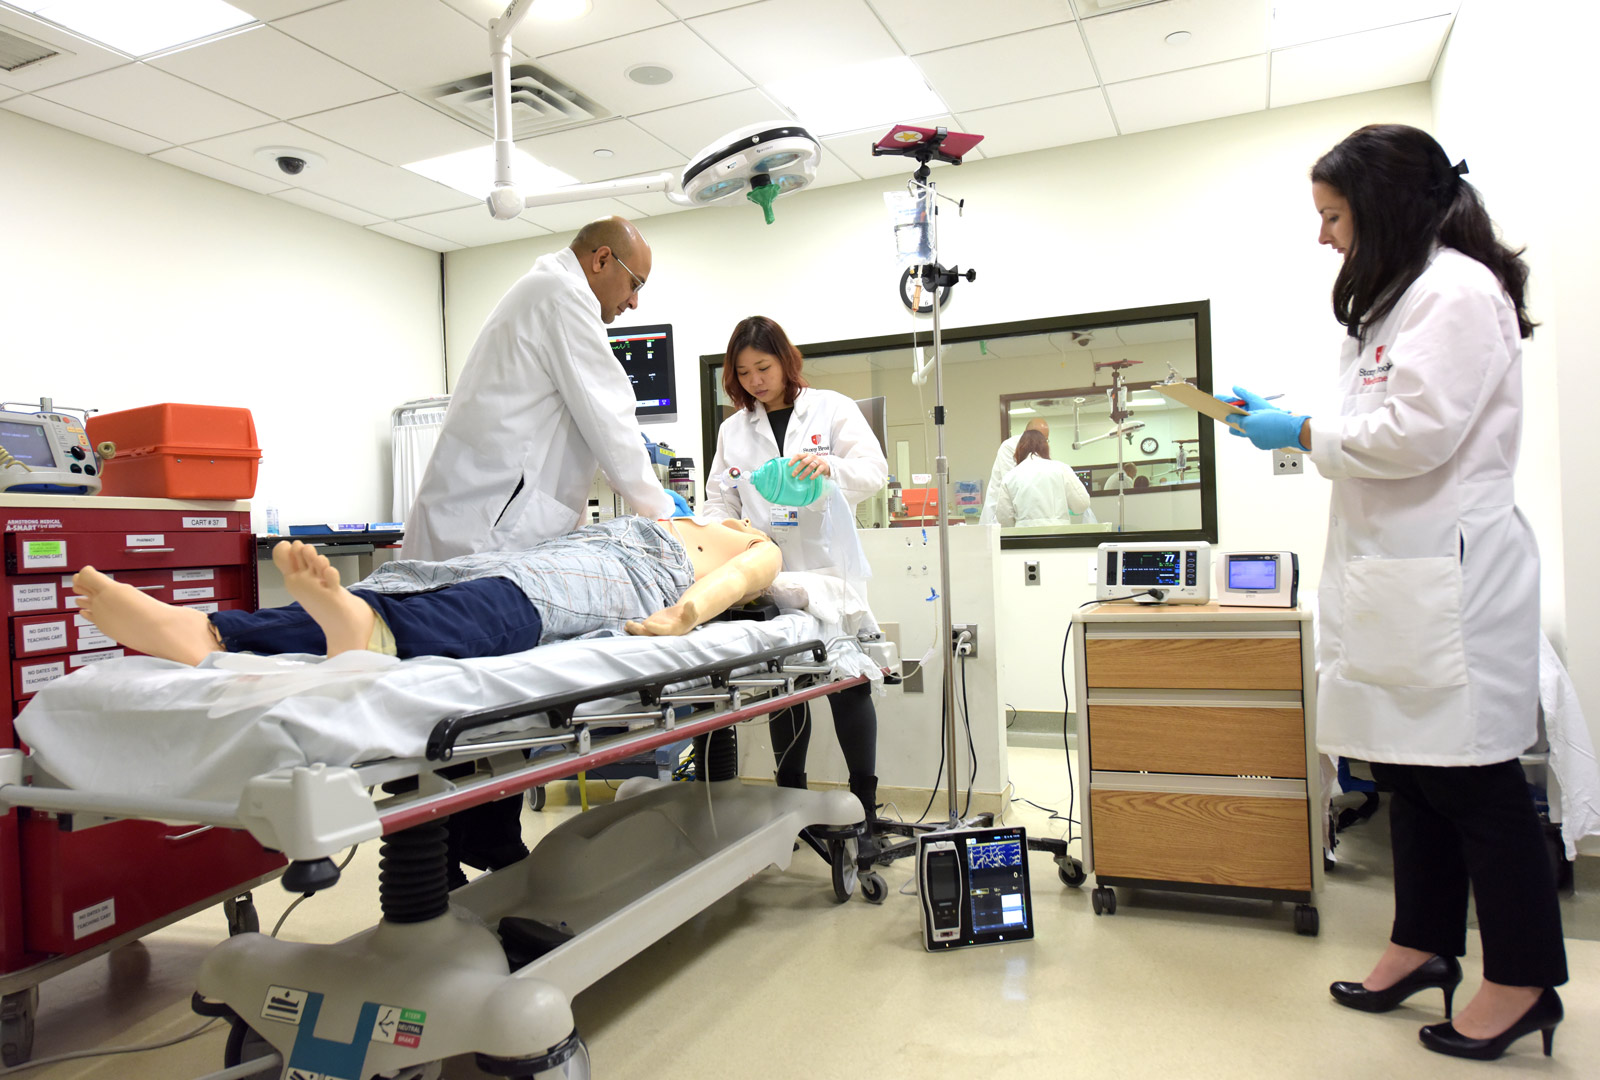 Researchers Demonstrate Equipment Set-Up for AWARE II Study at Stony Brook University Hospital